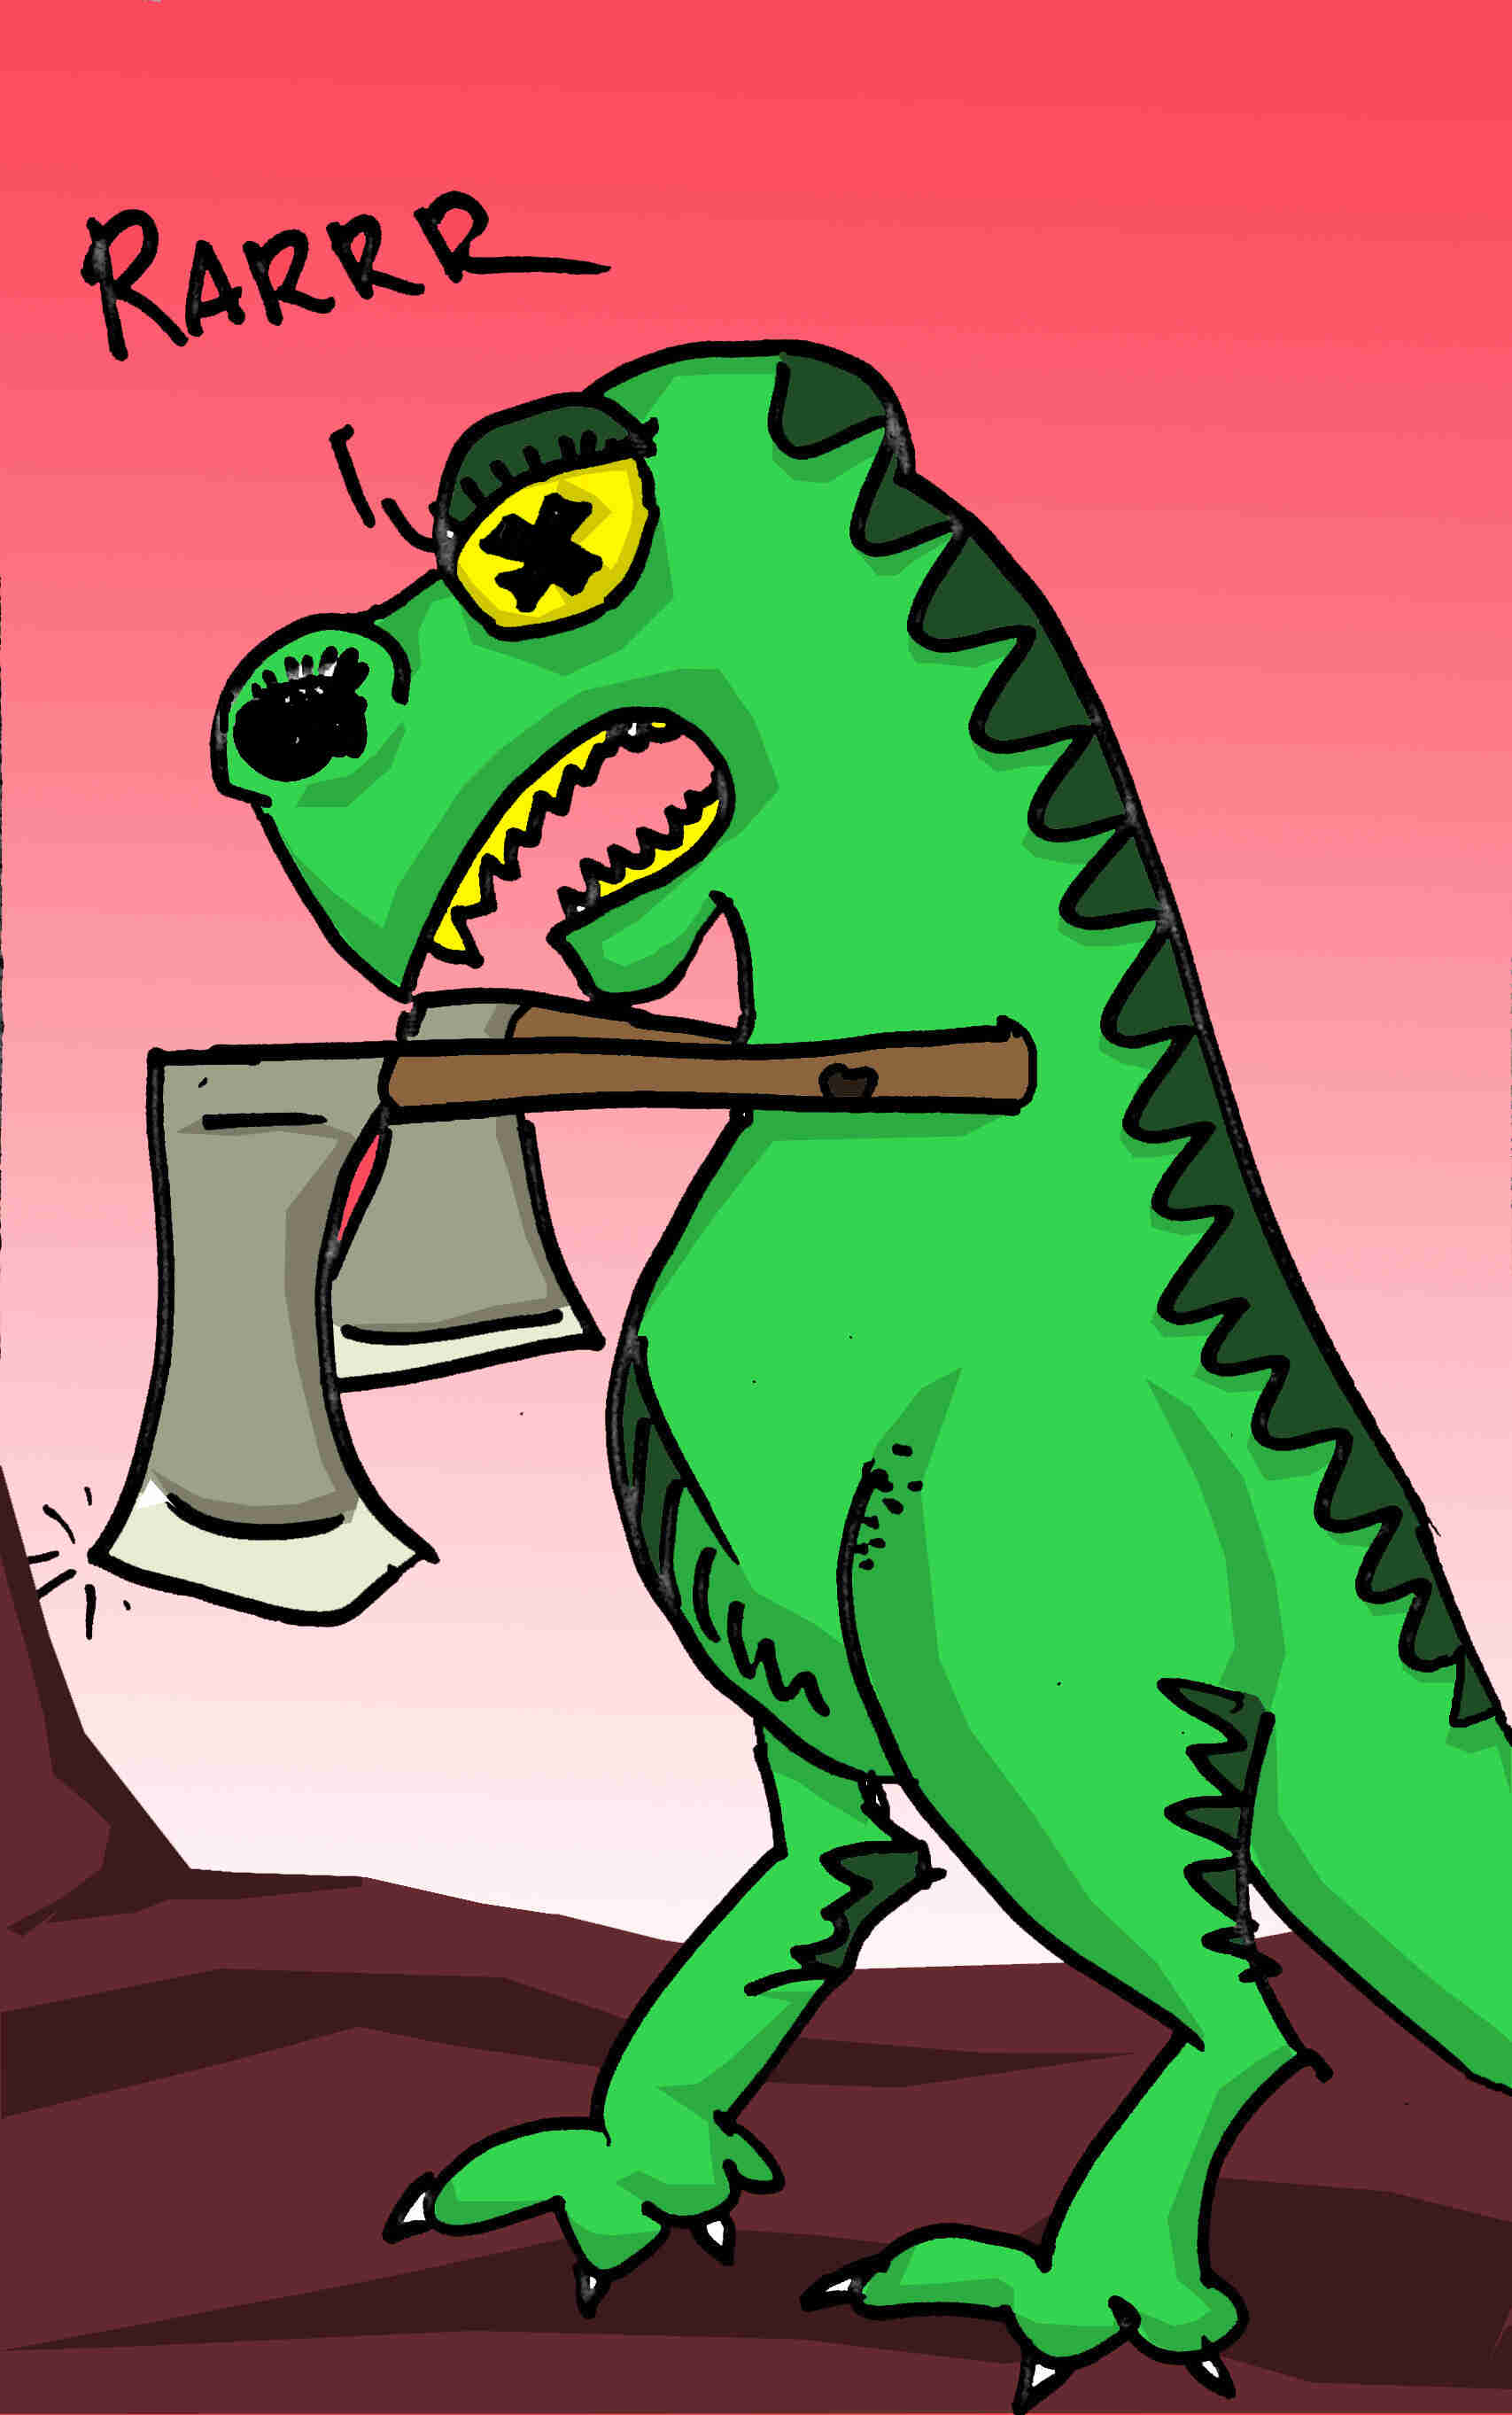 Colored illustration of a green dinosaur with axe arms, against a pink background, with RARRR, spelled out above